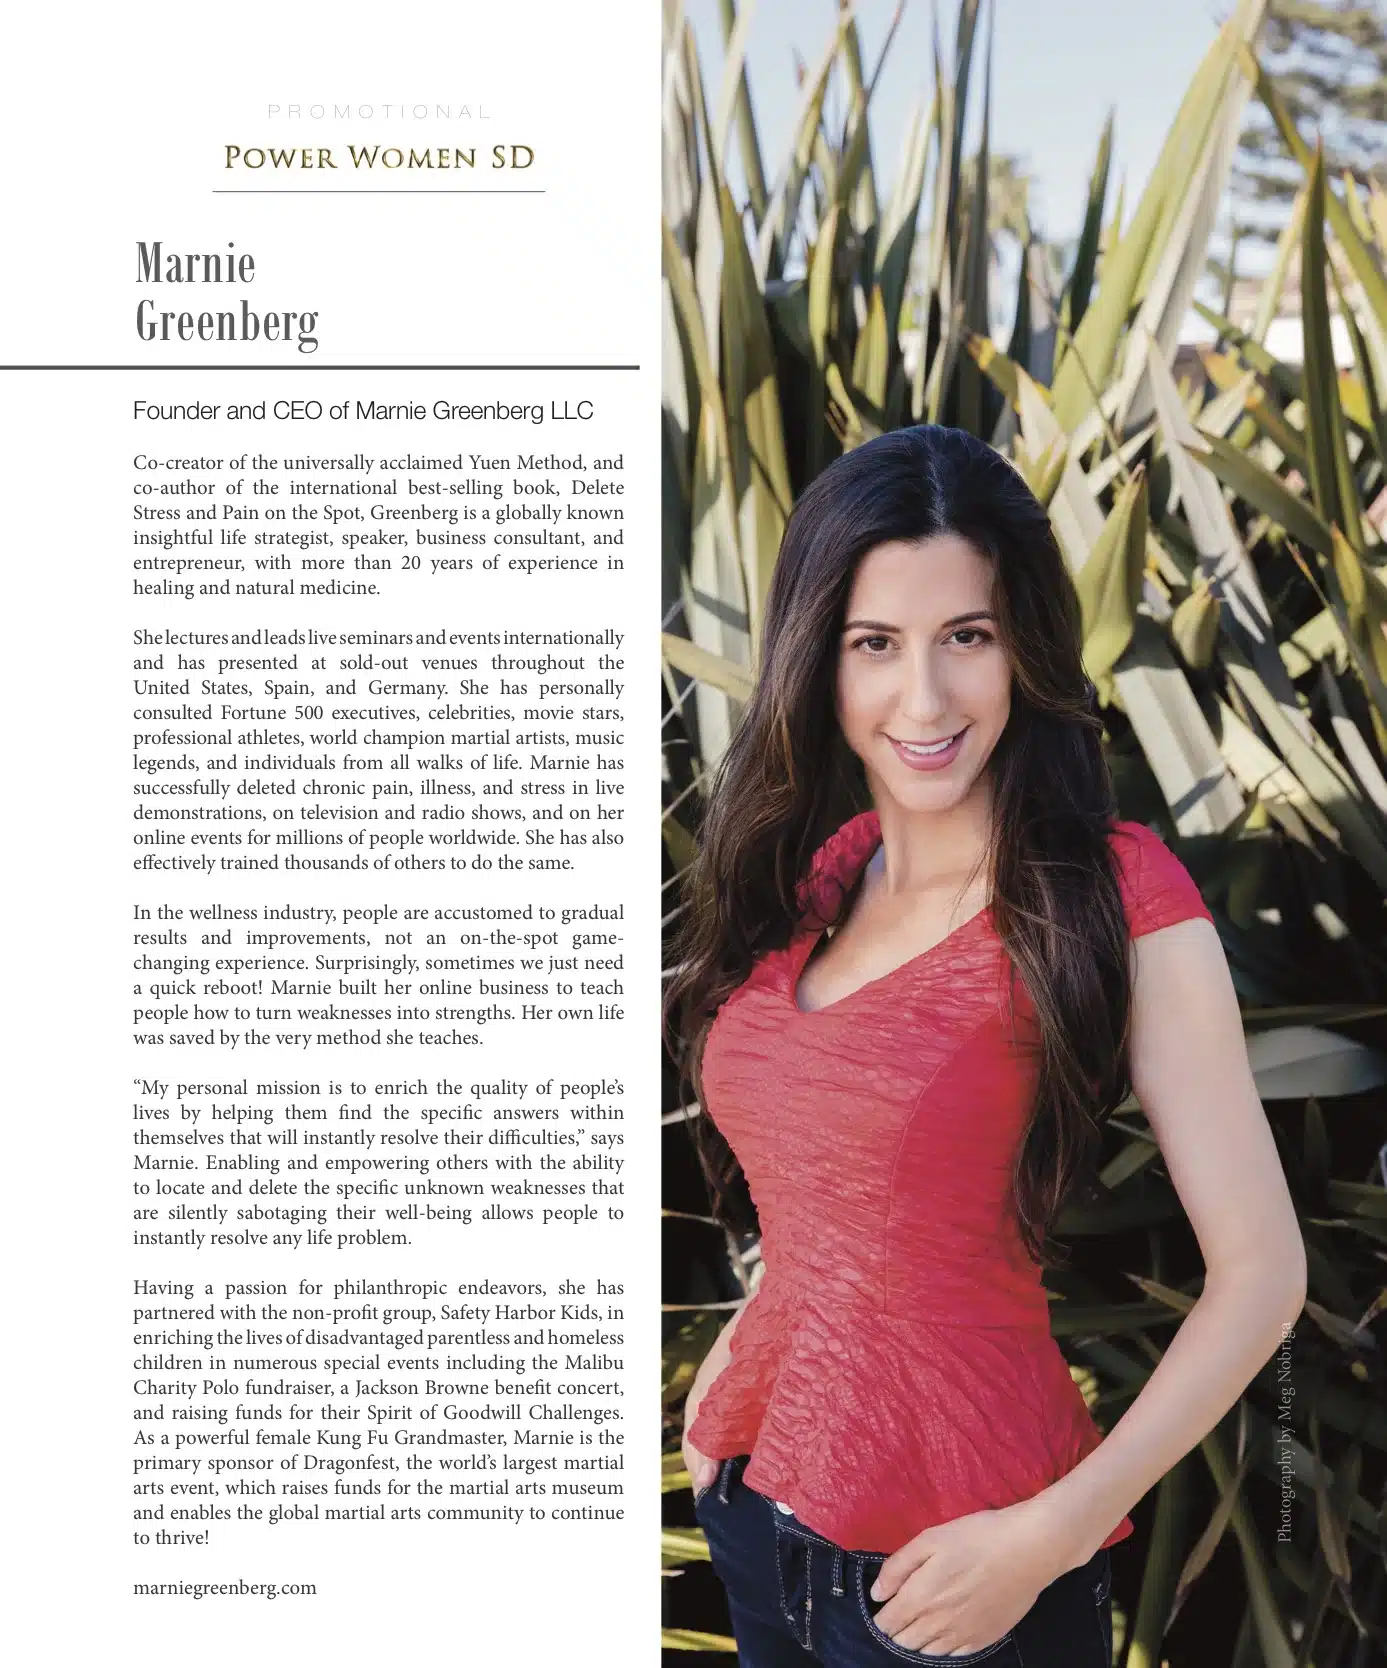 Marnie Greenberg Discover magazine article